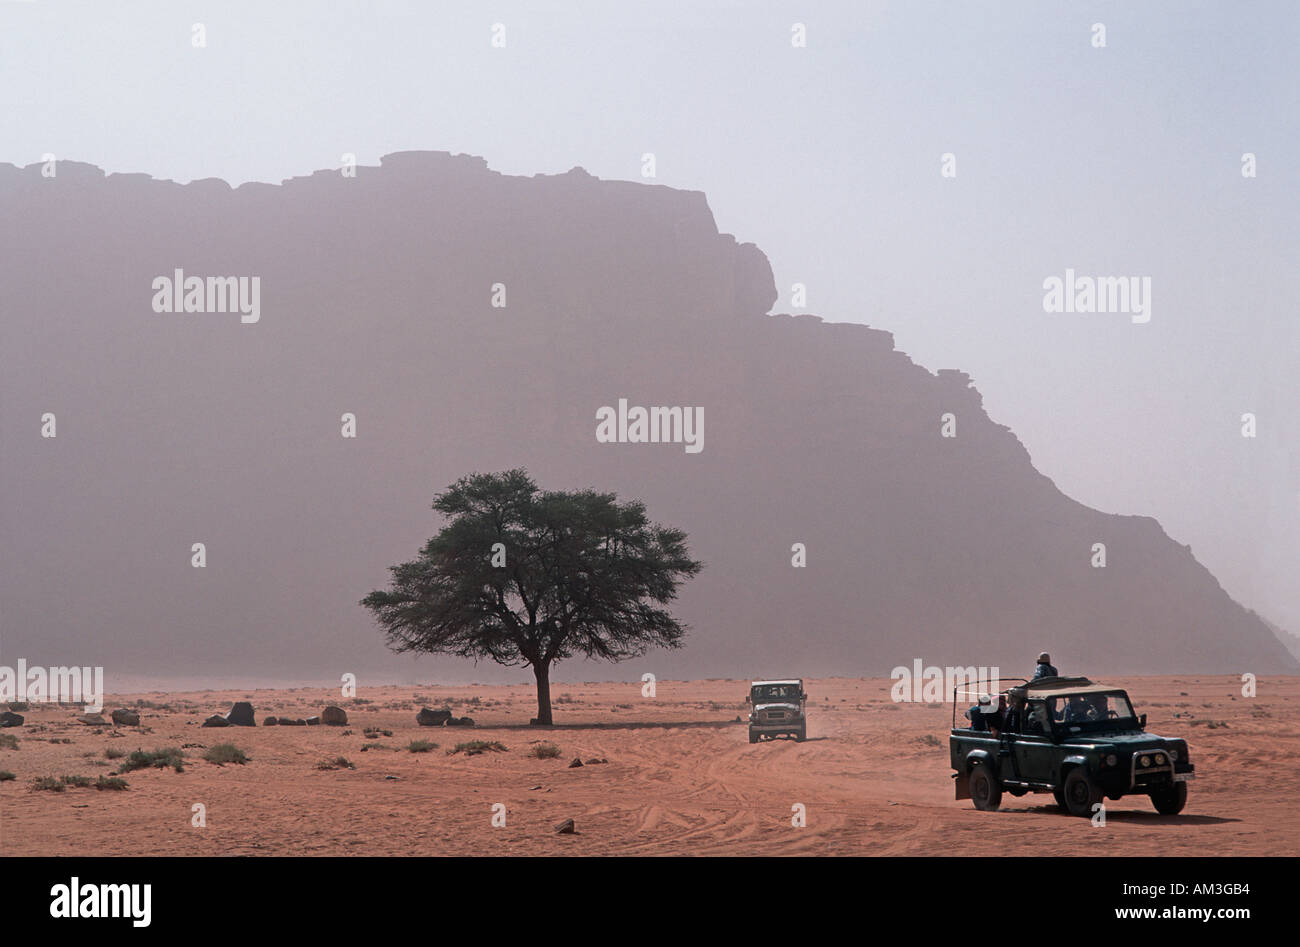 Floor of the desert with outcrops called Jebels in the distance Jeeps crossing the desert floor Wadi Rum Jordan Stock Photo